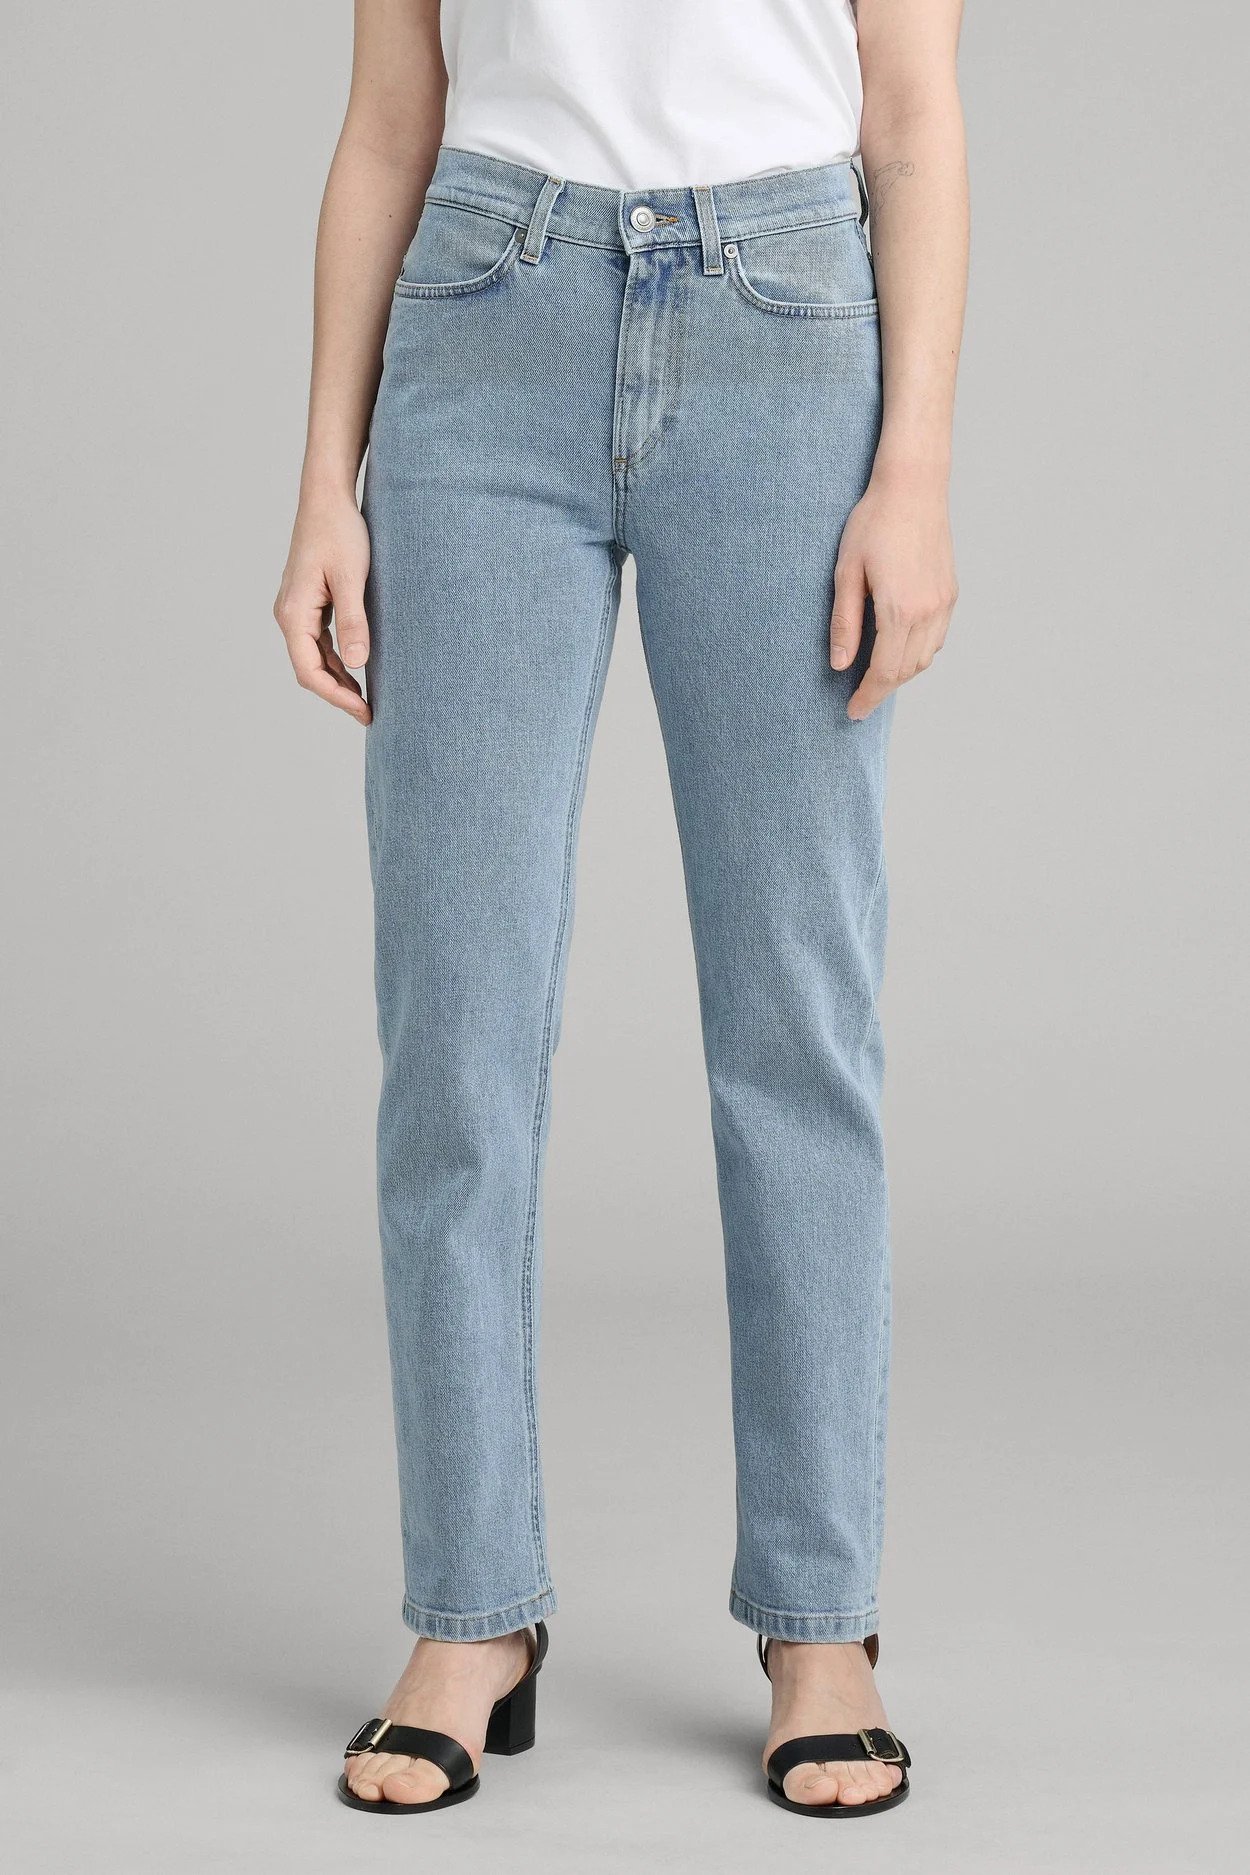 asket the standard jeans